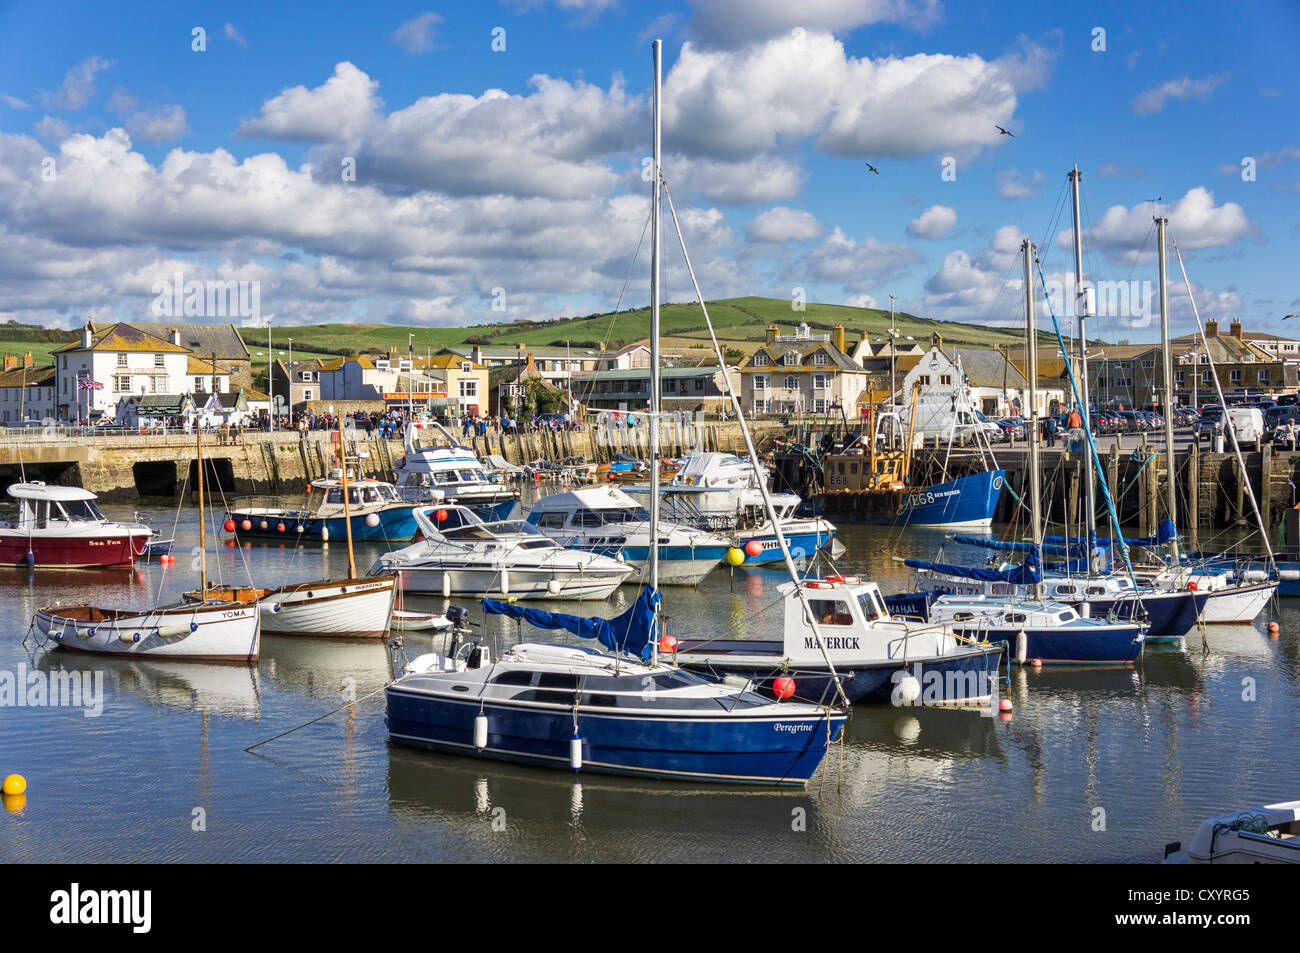 West Bay, Dorset, UK - the harbour with fishing boats Stock Photo